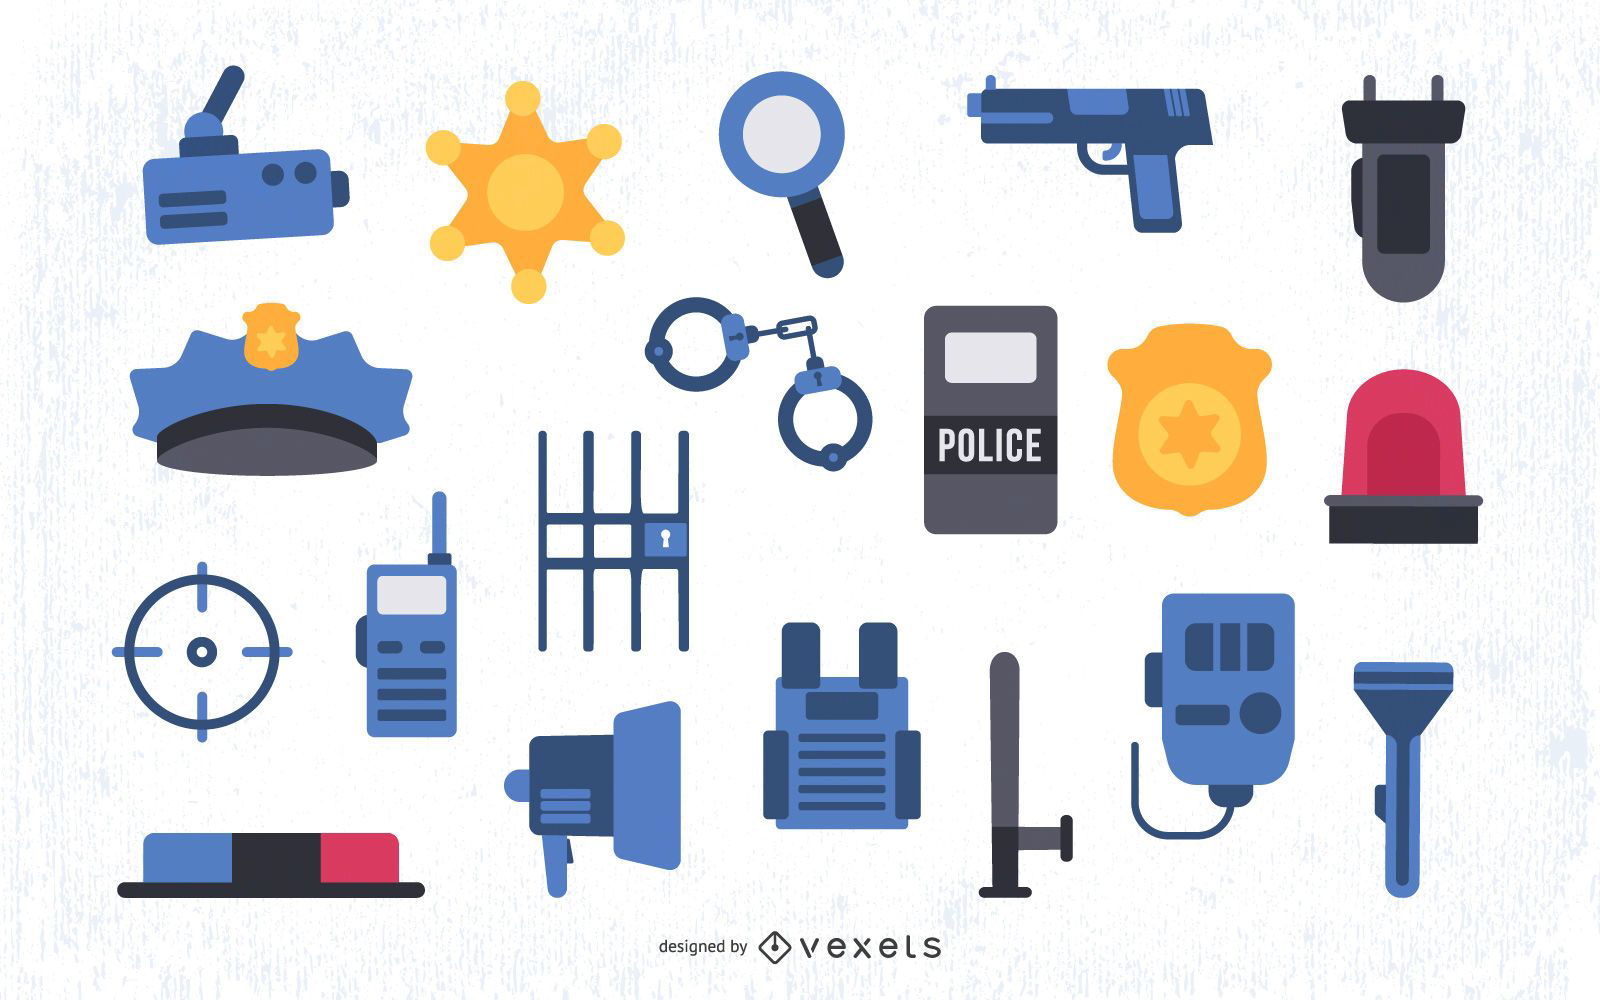 Colored Police Flat Elements Set